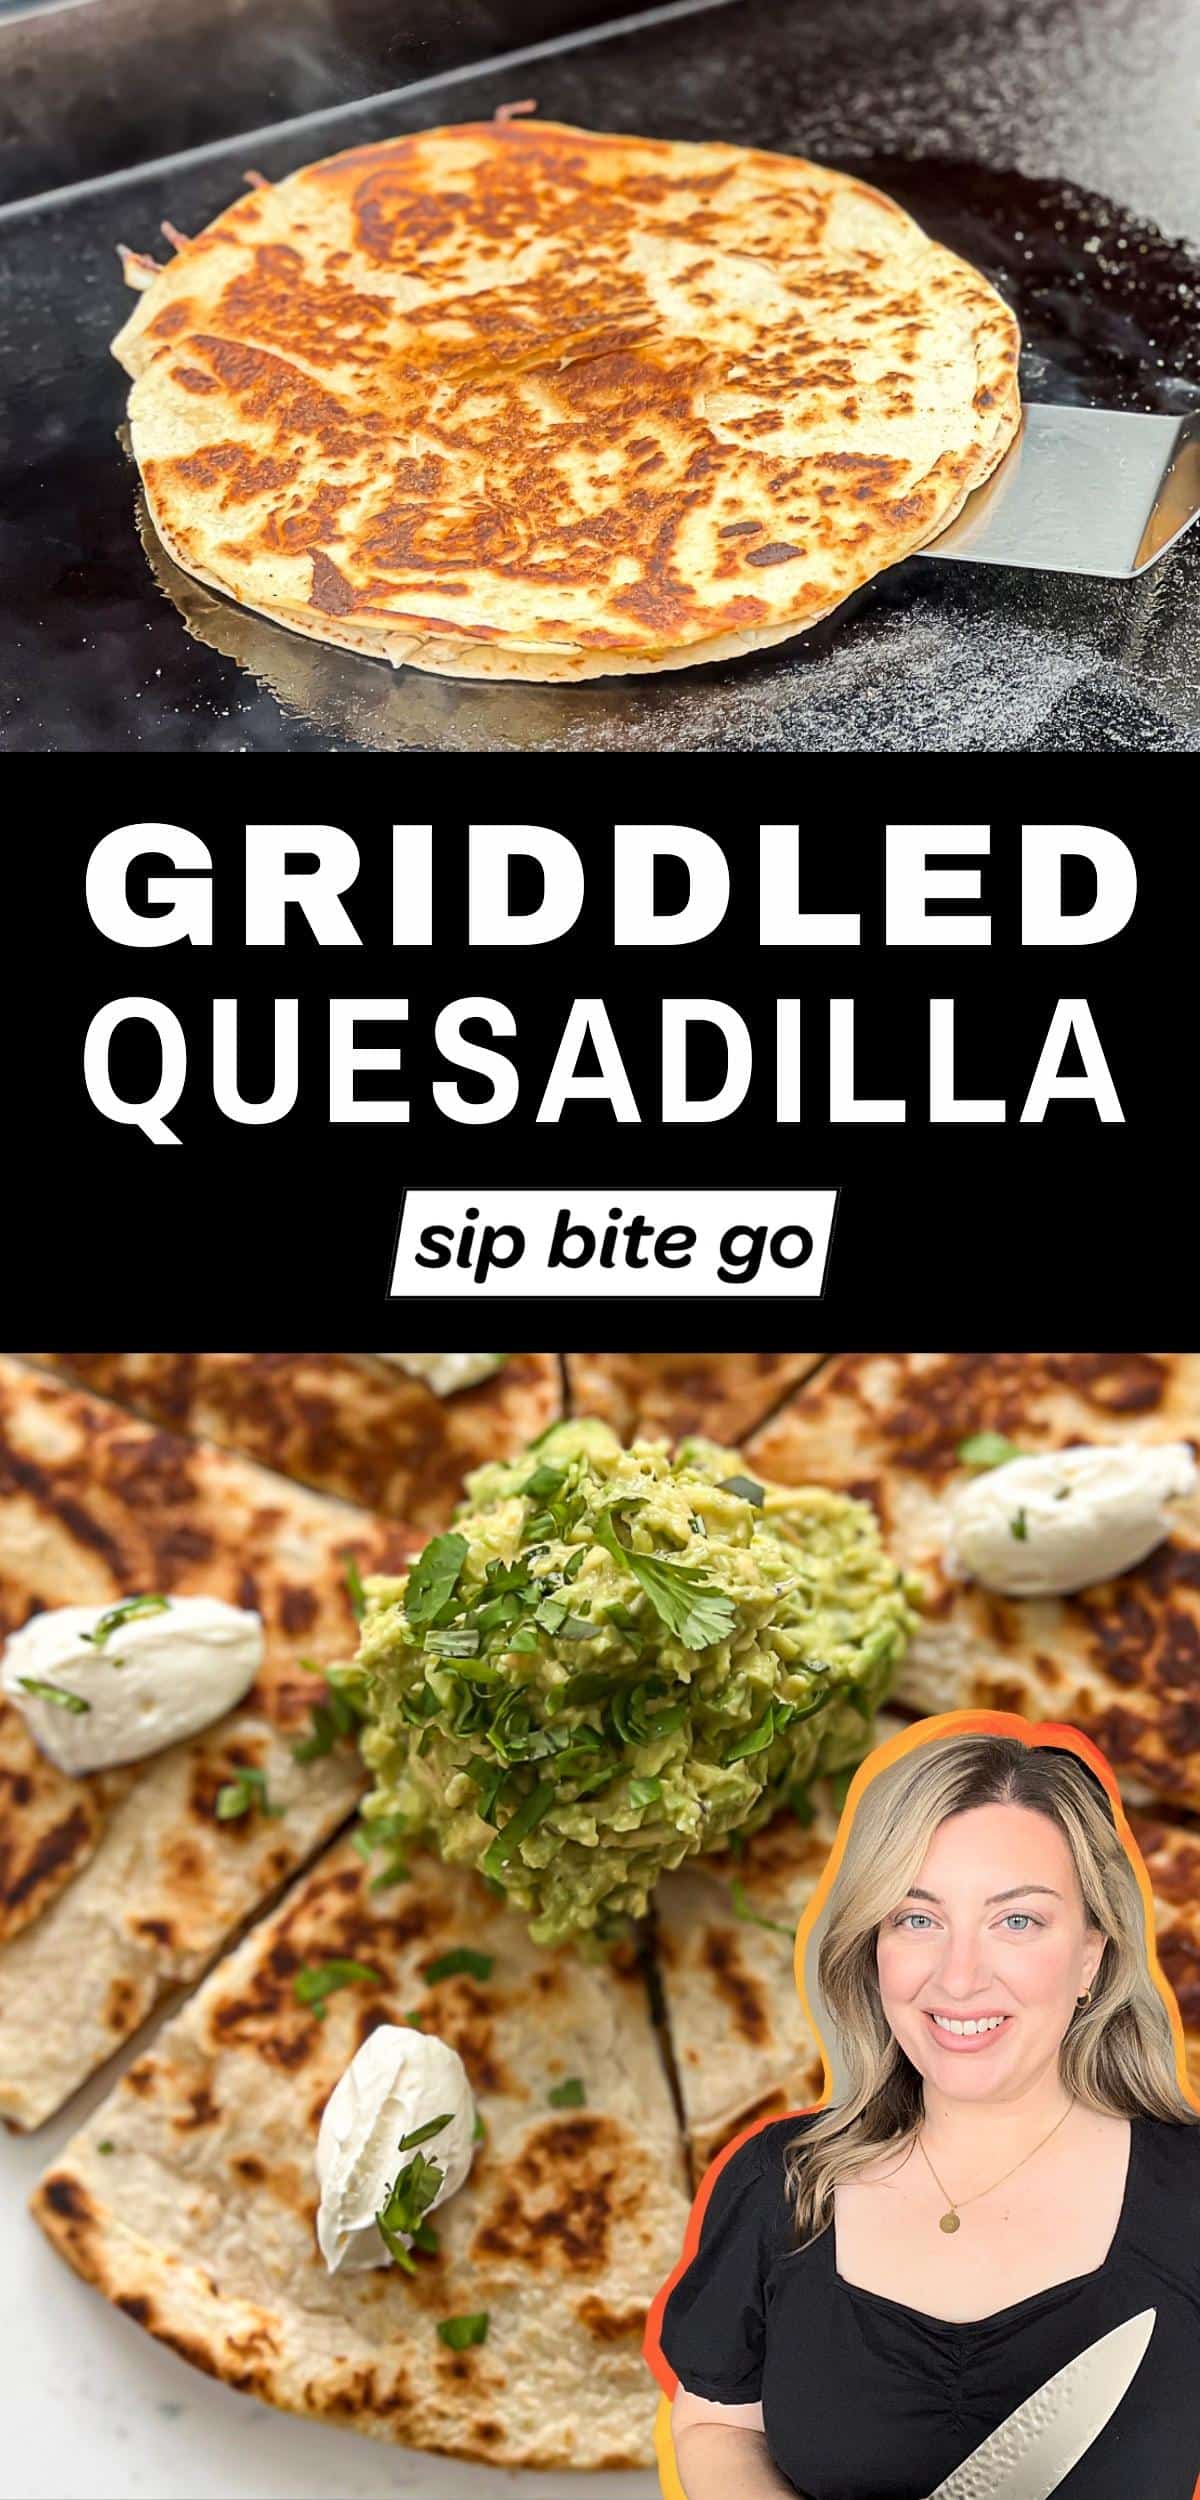 Griddle Quesadilla Recipe with text overlay and Jenna Passaro from Sip Bite Go